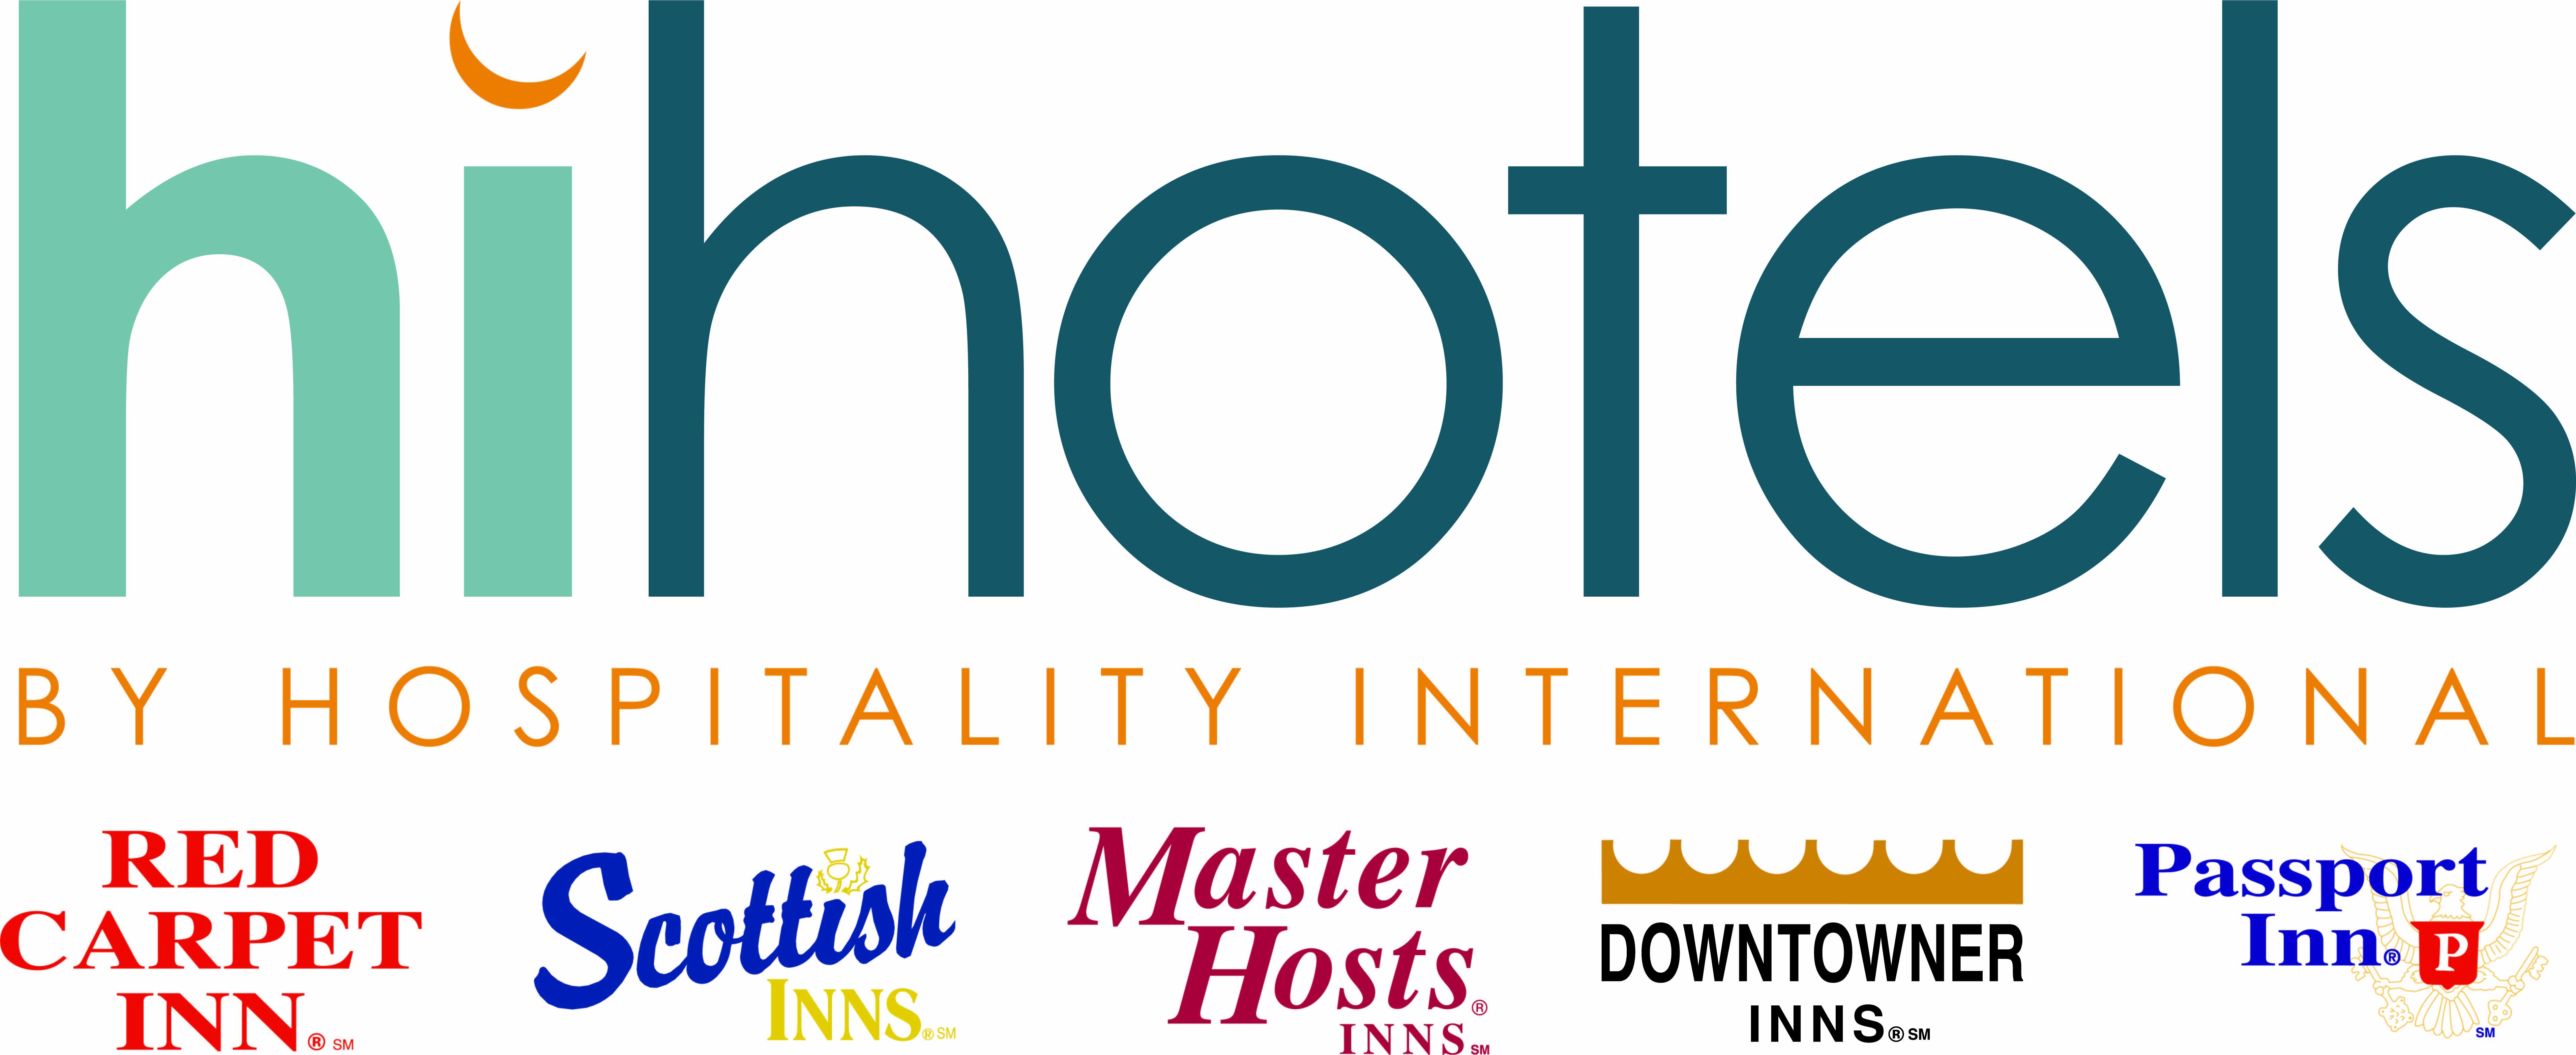 Hihotels By Hospitality International Convention 2021   Growing Through Partnership ?t=1591631122